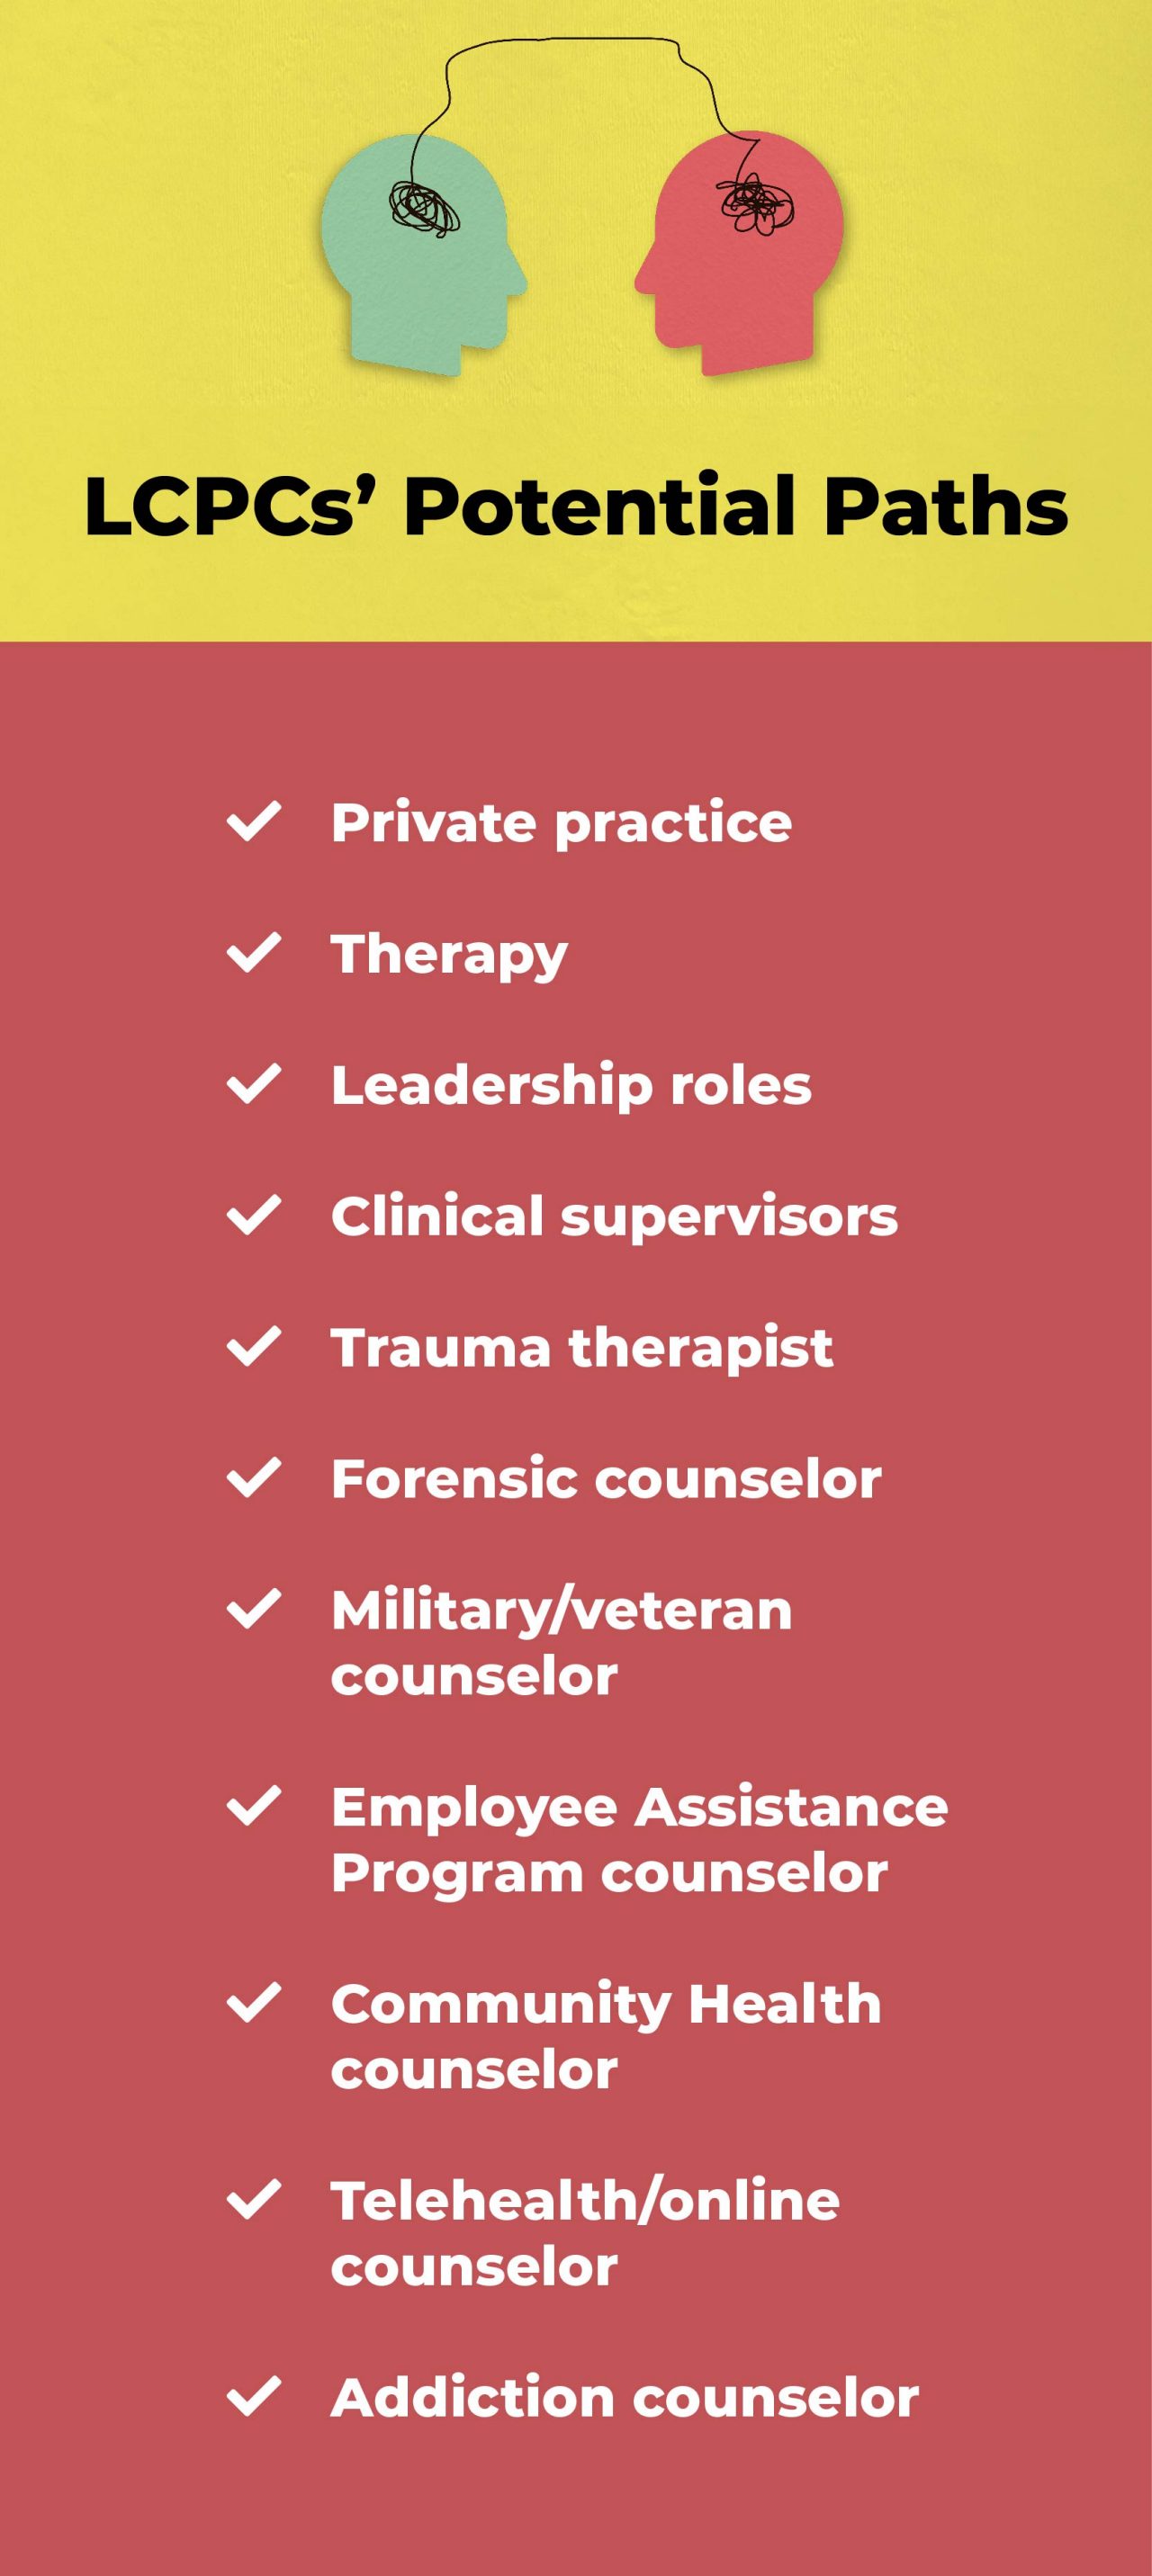 Text that reads, "LCPCs' Potential Paths: Private practice; Therapy; Leadership roles; Clinical supervisors; Trauma therapist; Forensic counselor; Military/veteran counselor; Employee Assistance Program counselor; Community health counselor; Telehealth/online counselor; Addiction counselor."